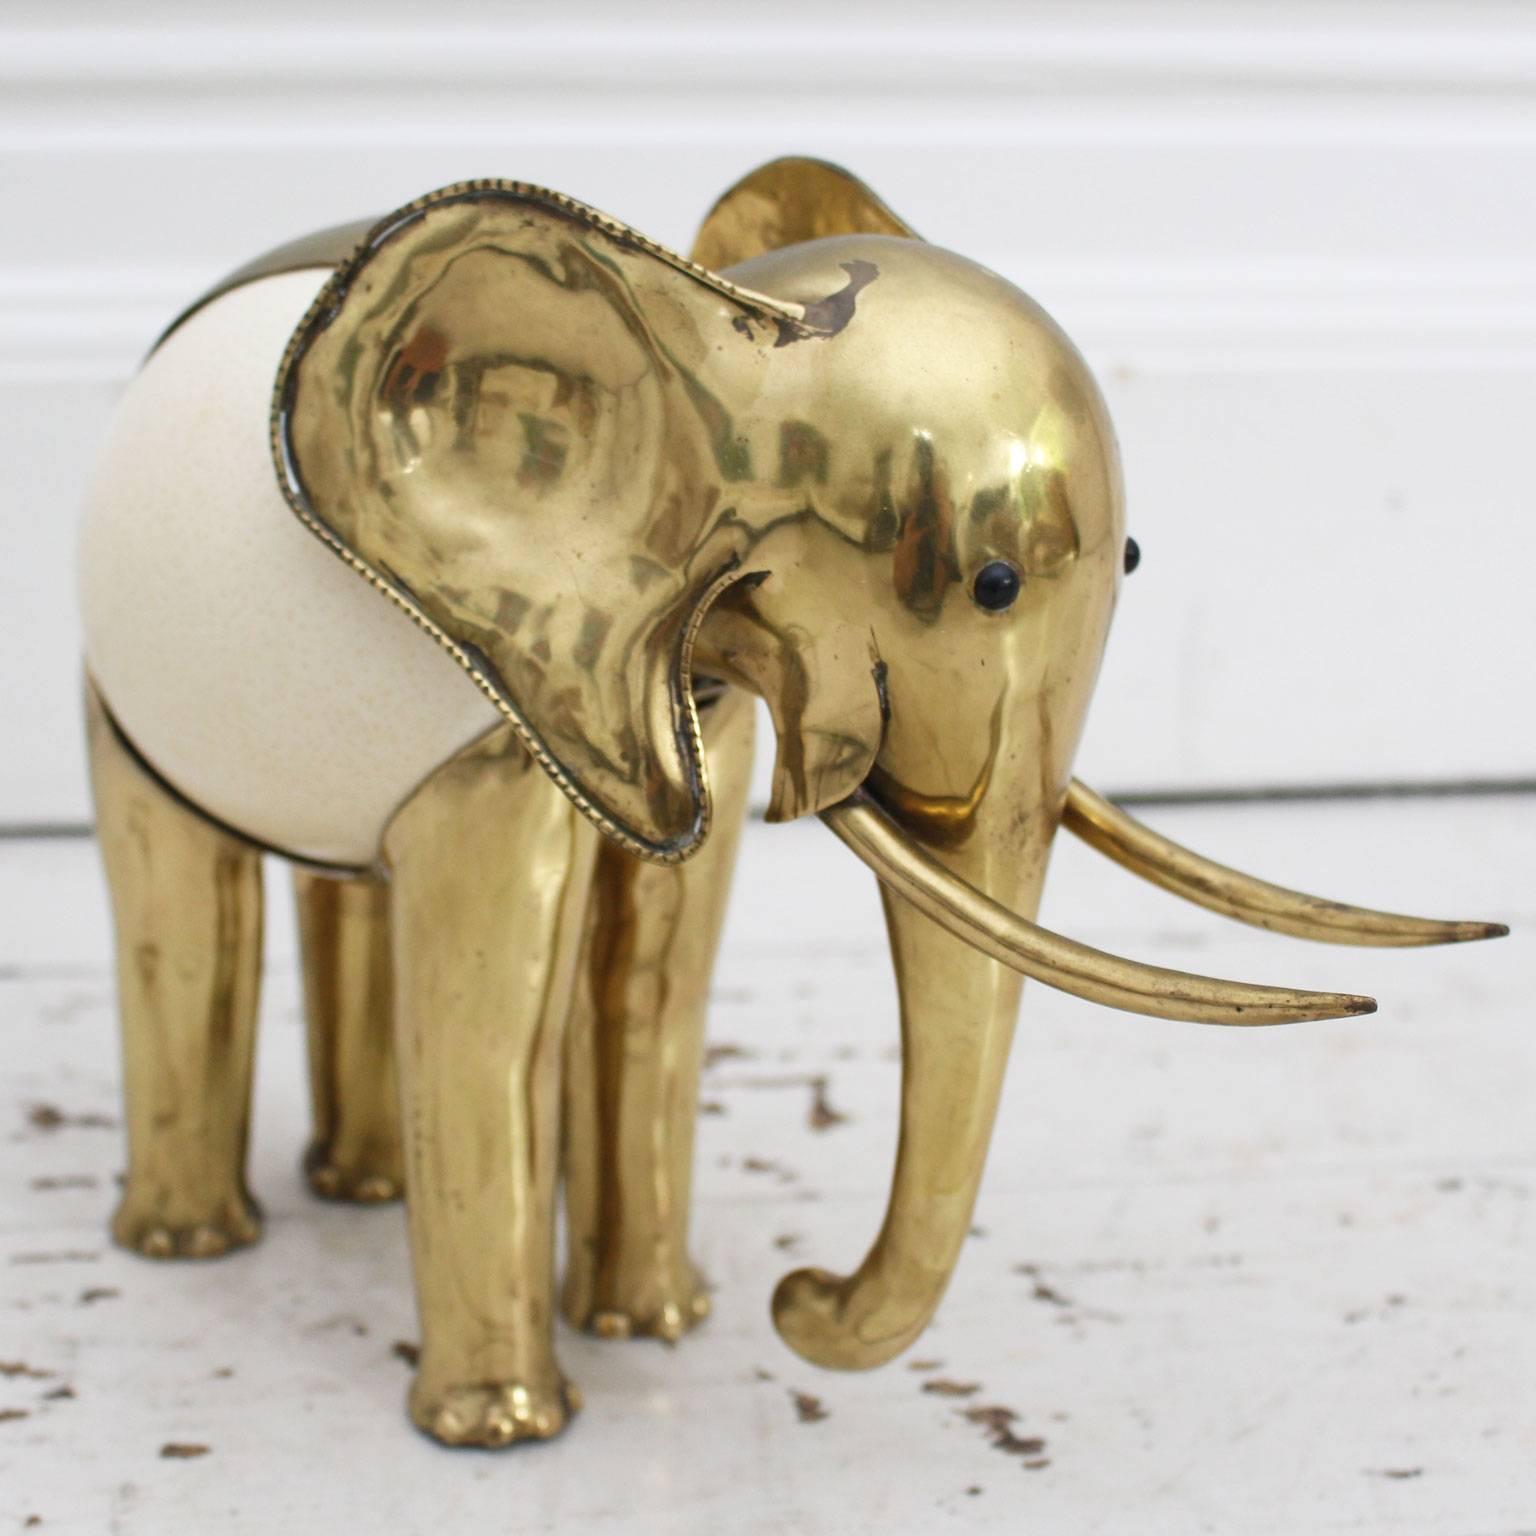 This elephant is a lovely piece of uselessness which as you can see from the photos is utterly charming.

Shipping in the UK & USA is free of charge

For outside the UK & USA please contact us for a quote.